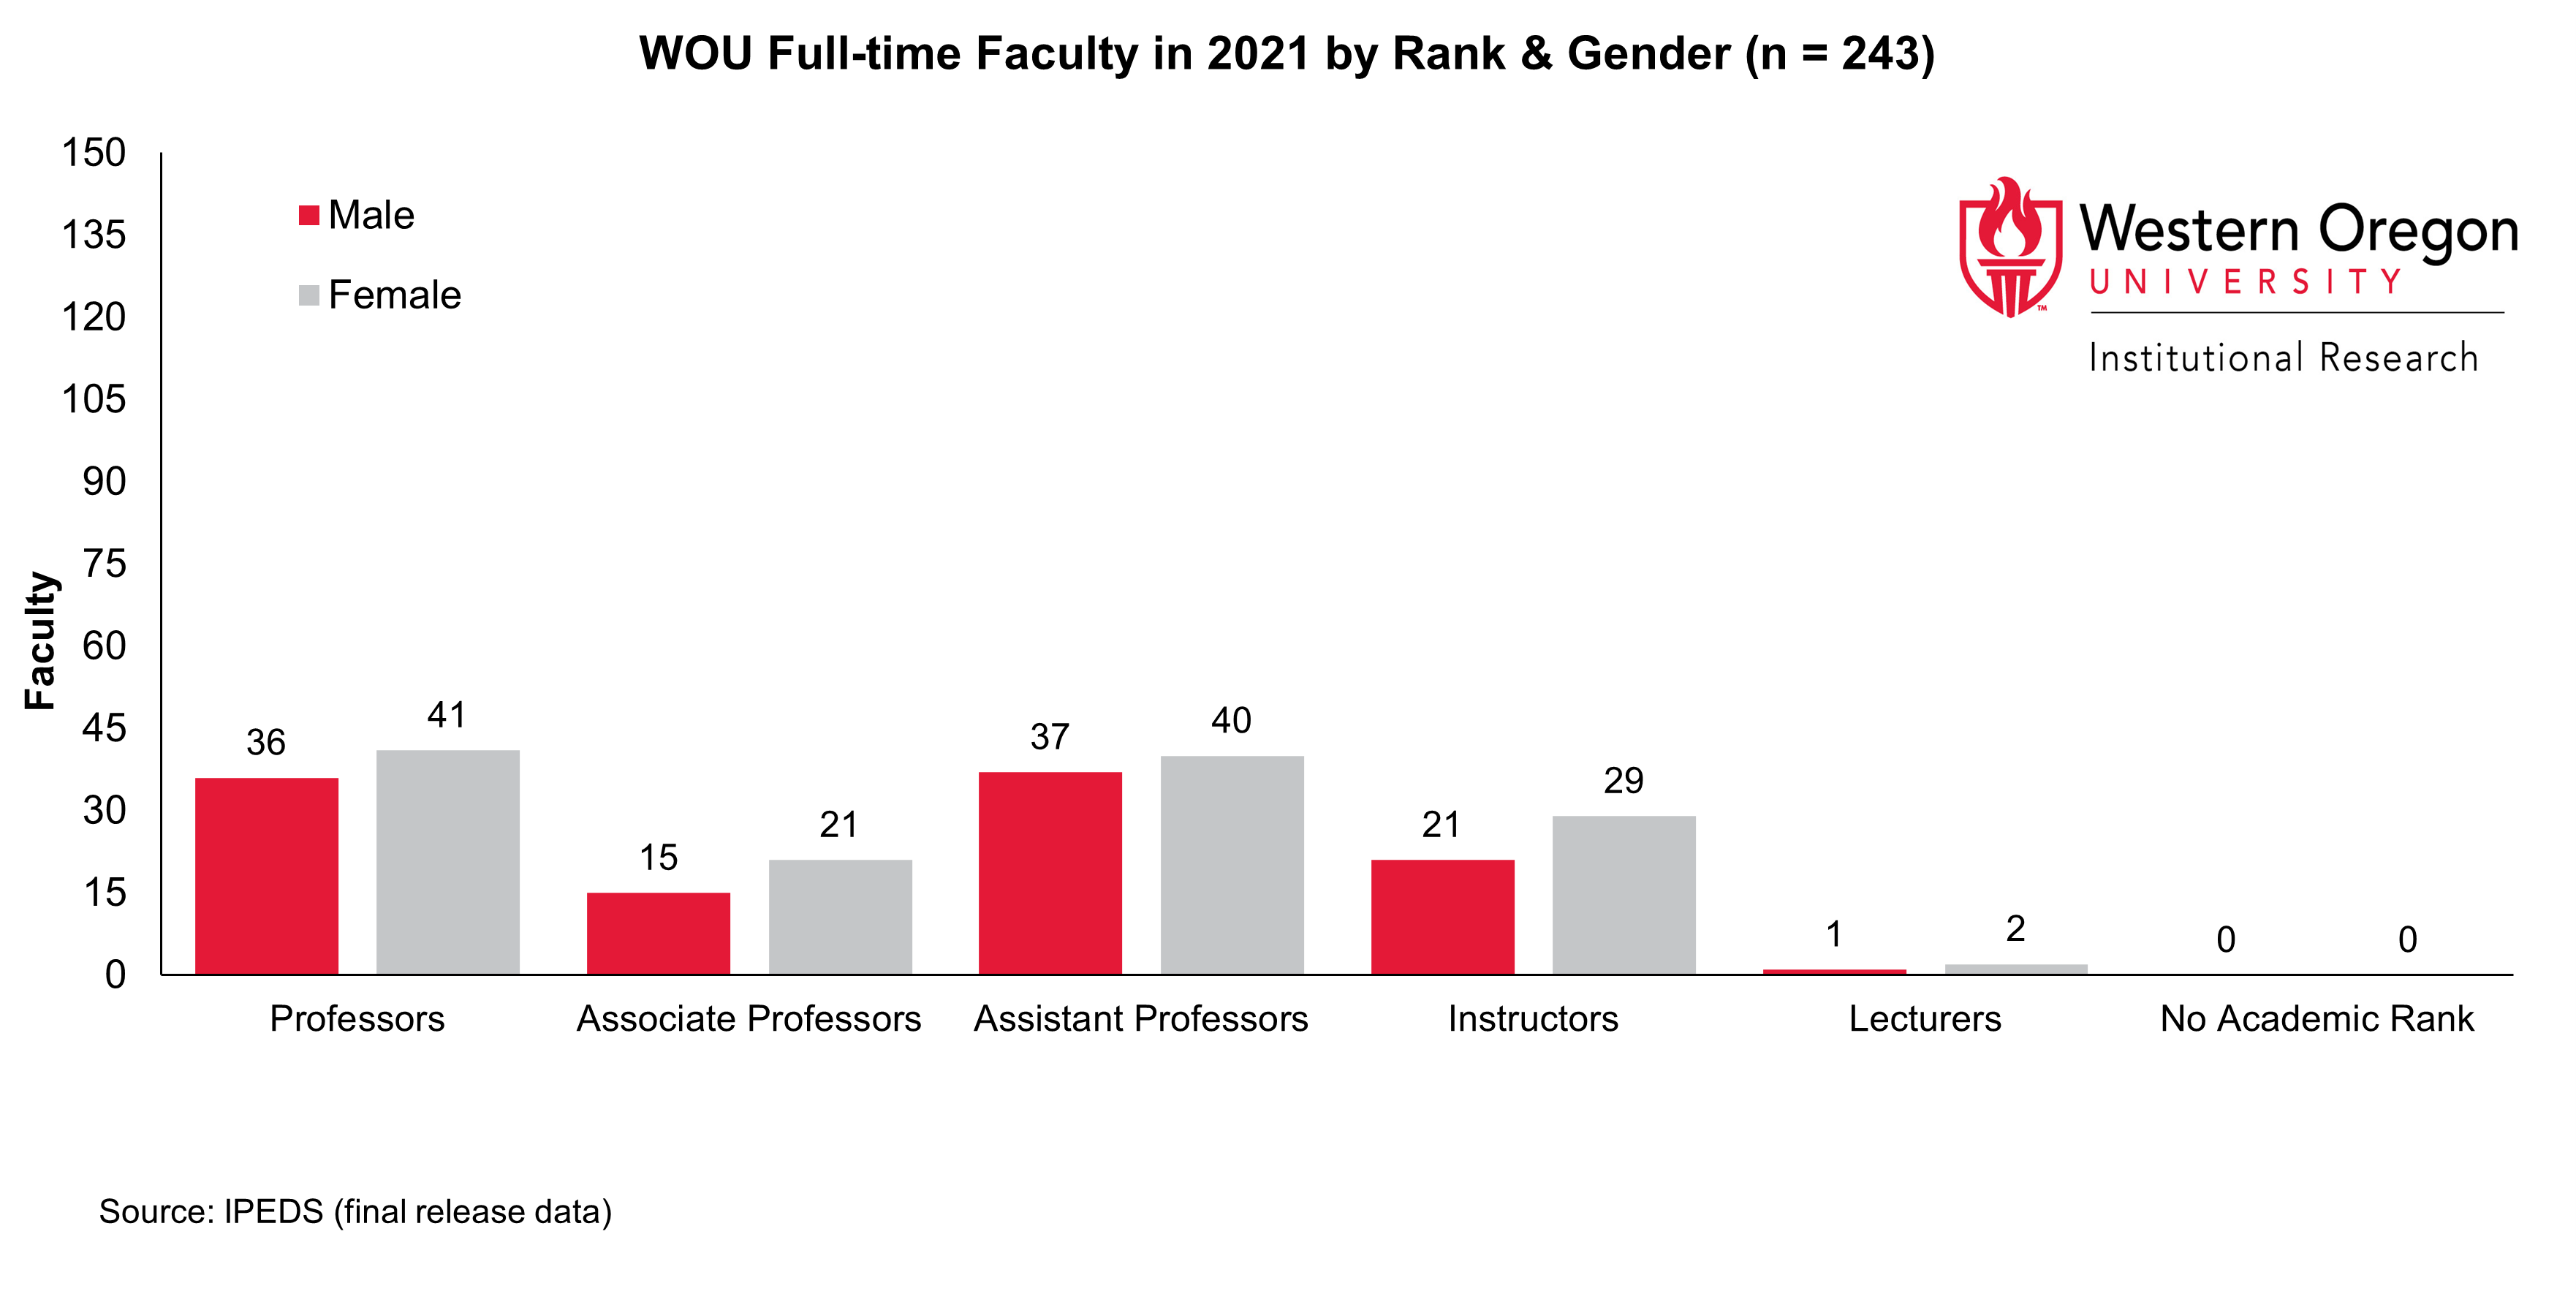 Bar graph of counts for full-time faculty at WOU in the most recent year, broken out by rank and gender, showing that female faculty outnumber male faculty